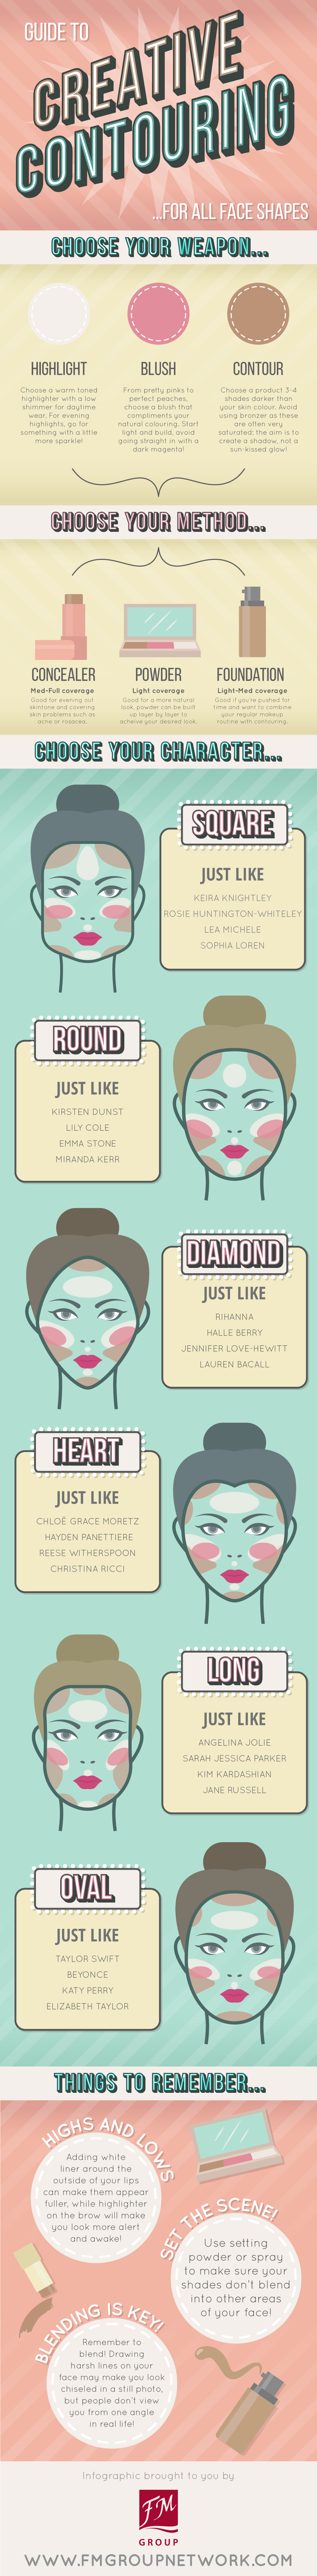 A Guide To Creative Contouring by FM Group